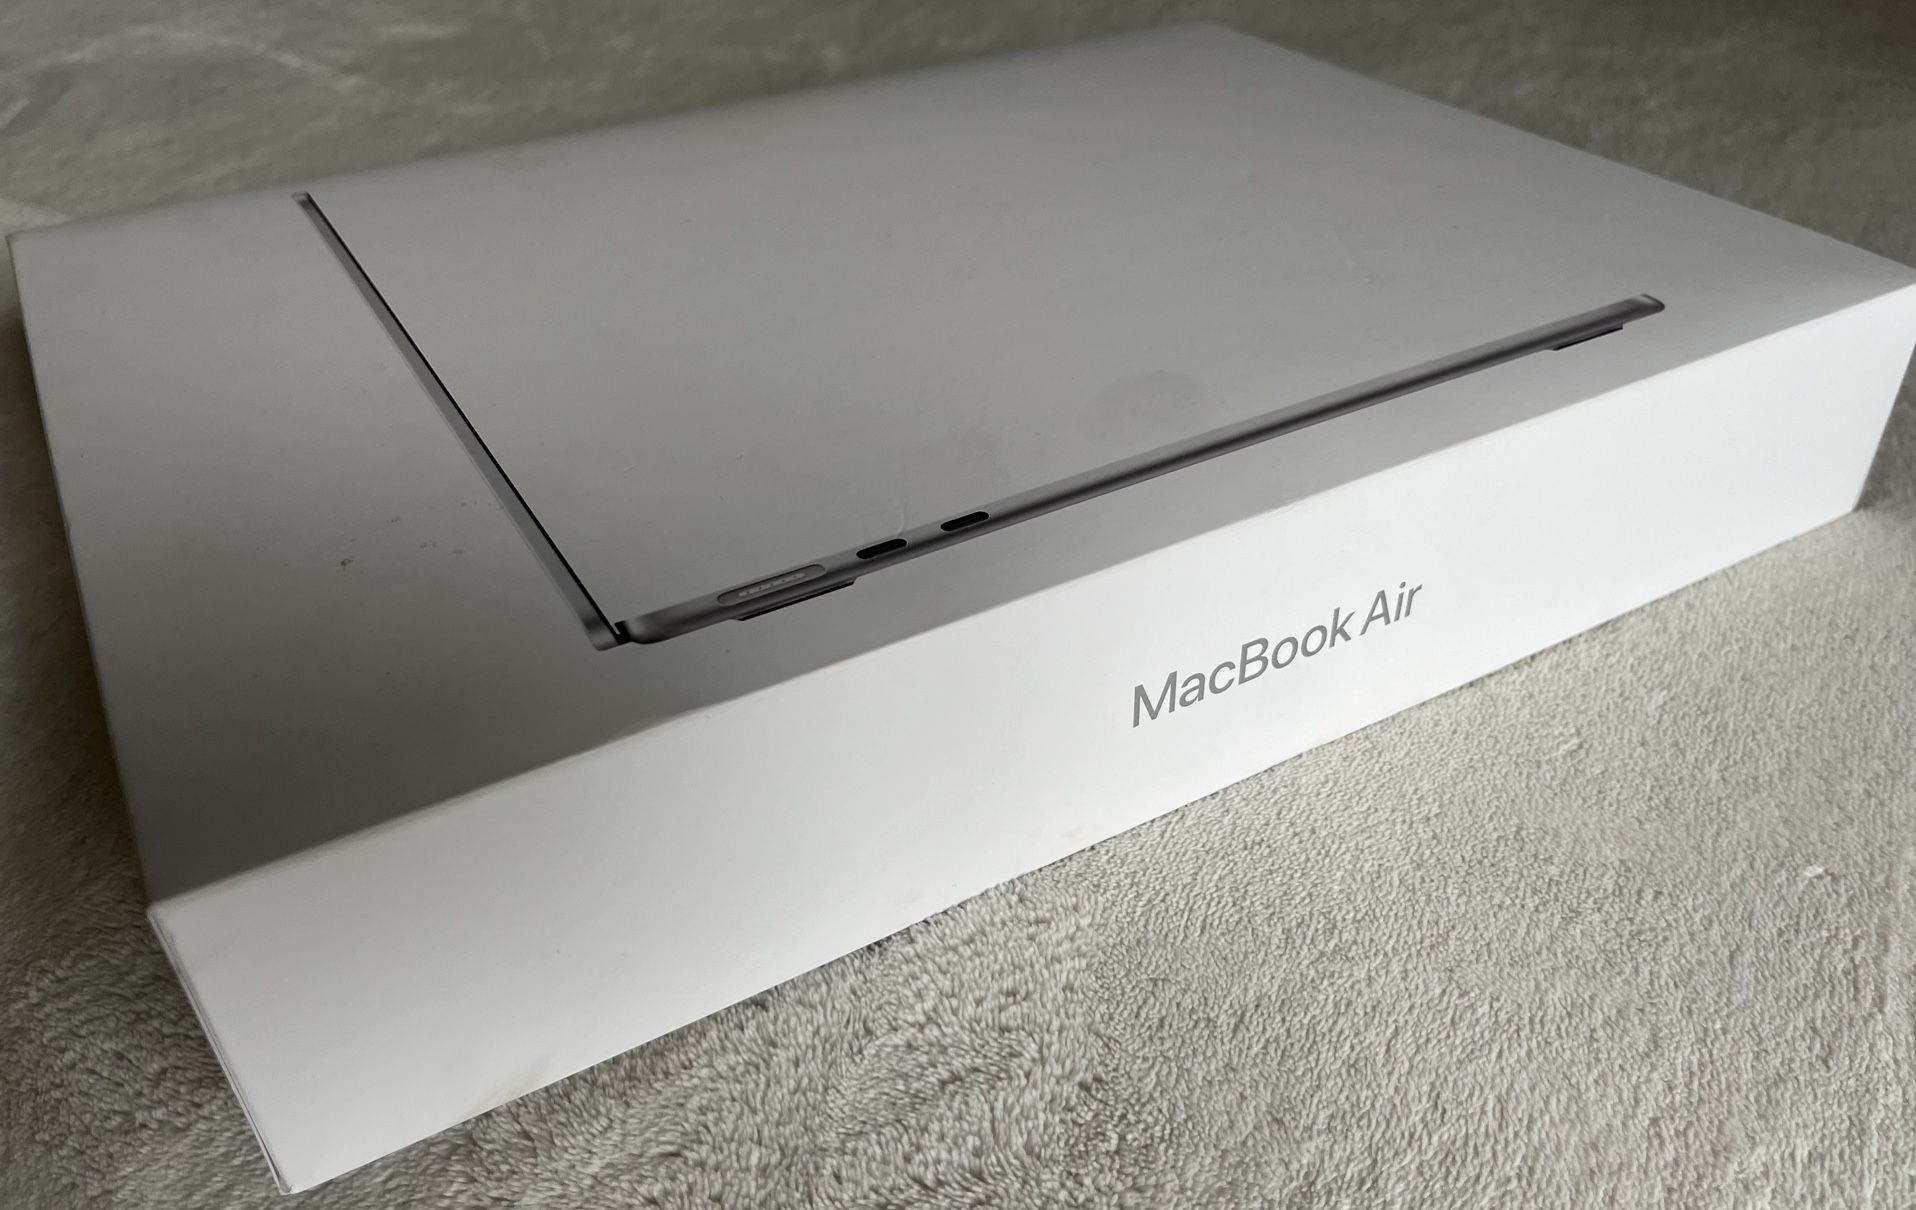 Apple MacBook Air 13” With M3 Chip. Brand New!!